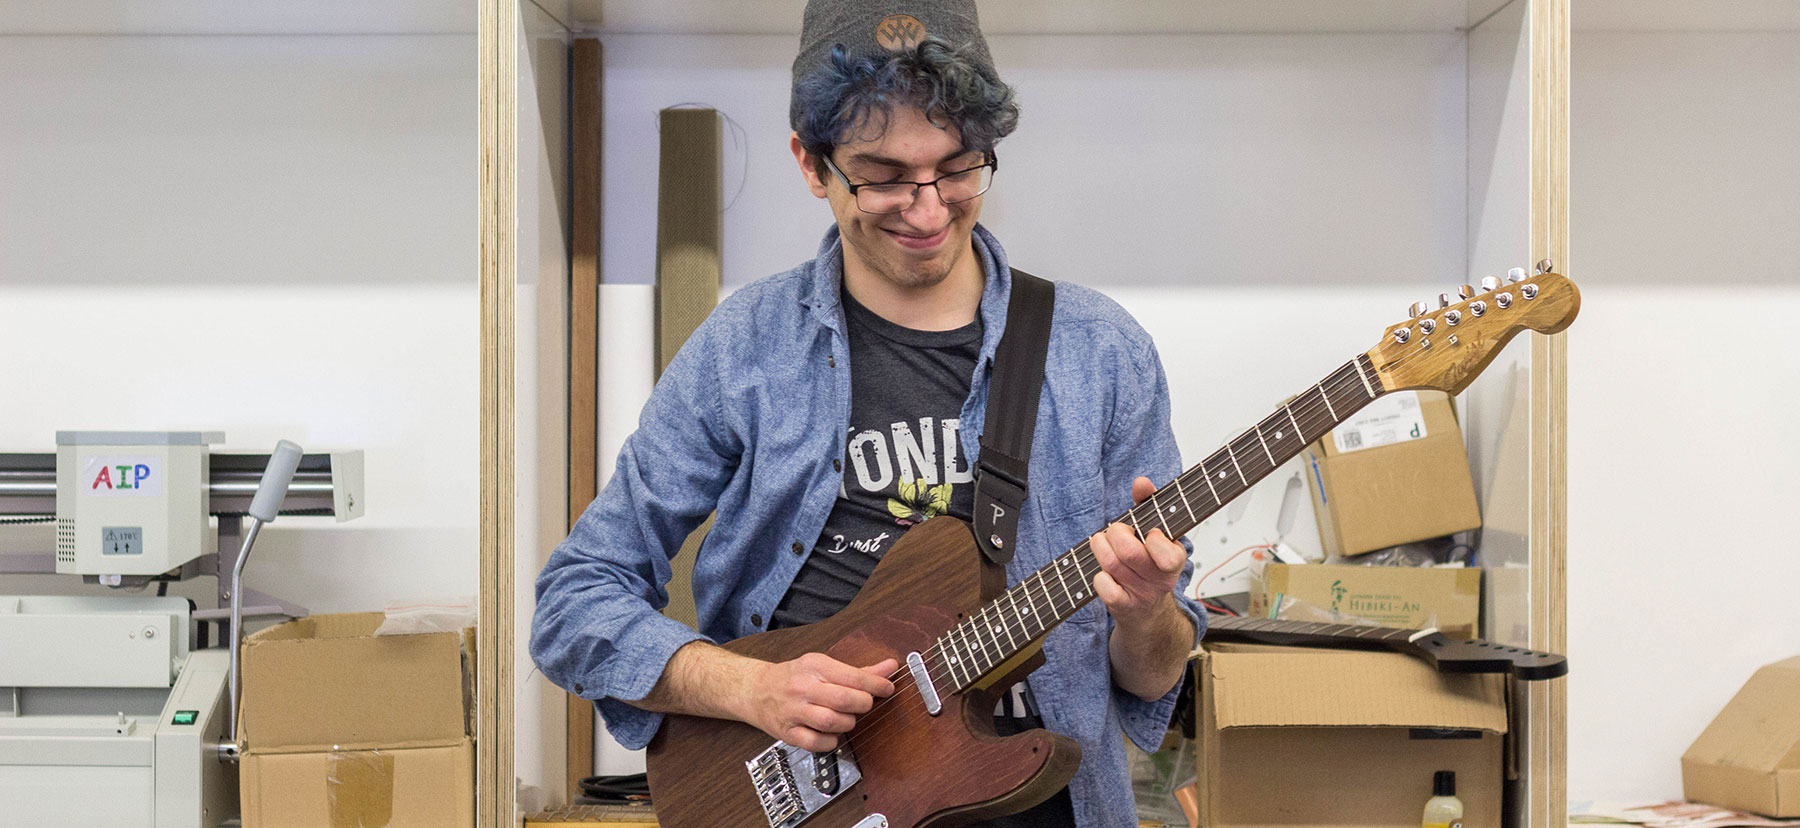 Micah Maben poses with a guitar created in VCAM's Maker Space